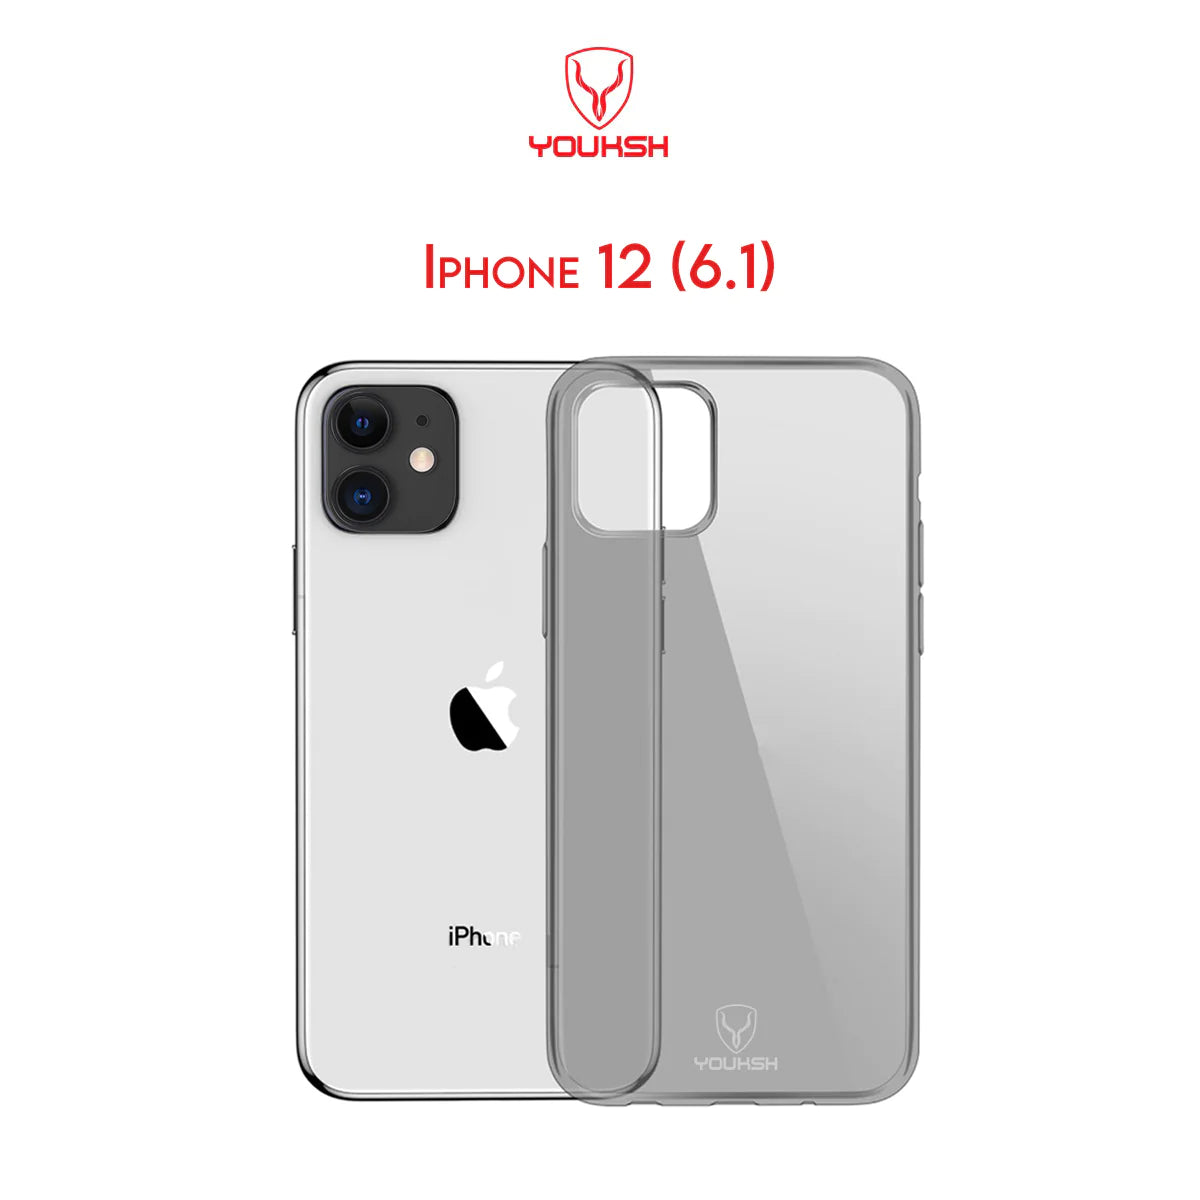 YOUKSH Apple iPhone 12 Mini Transparent Case | Soft Shock Proof Jelly Cover